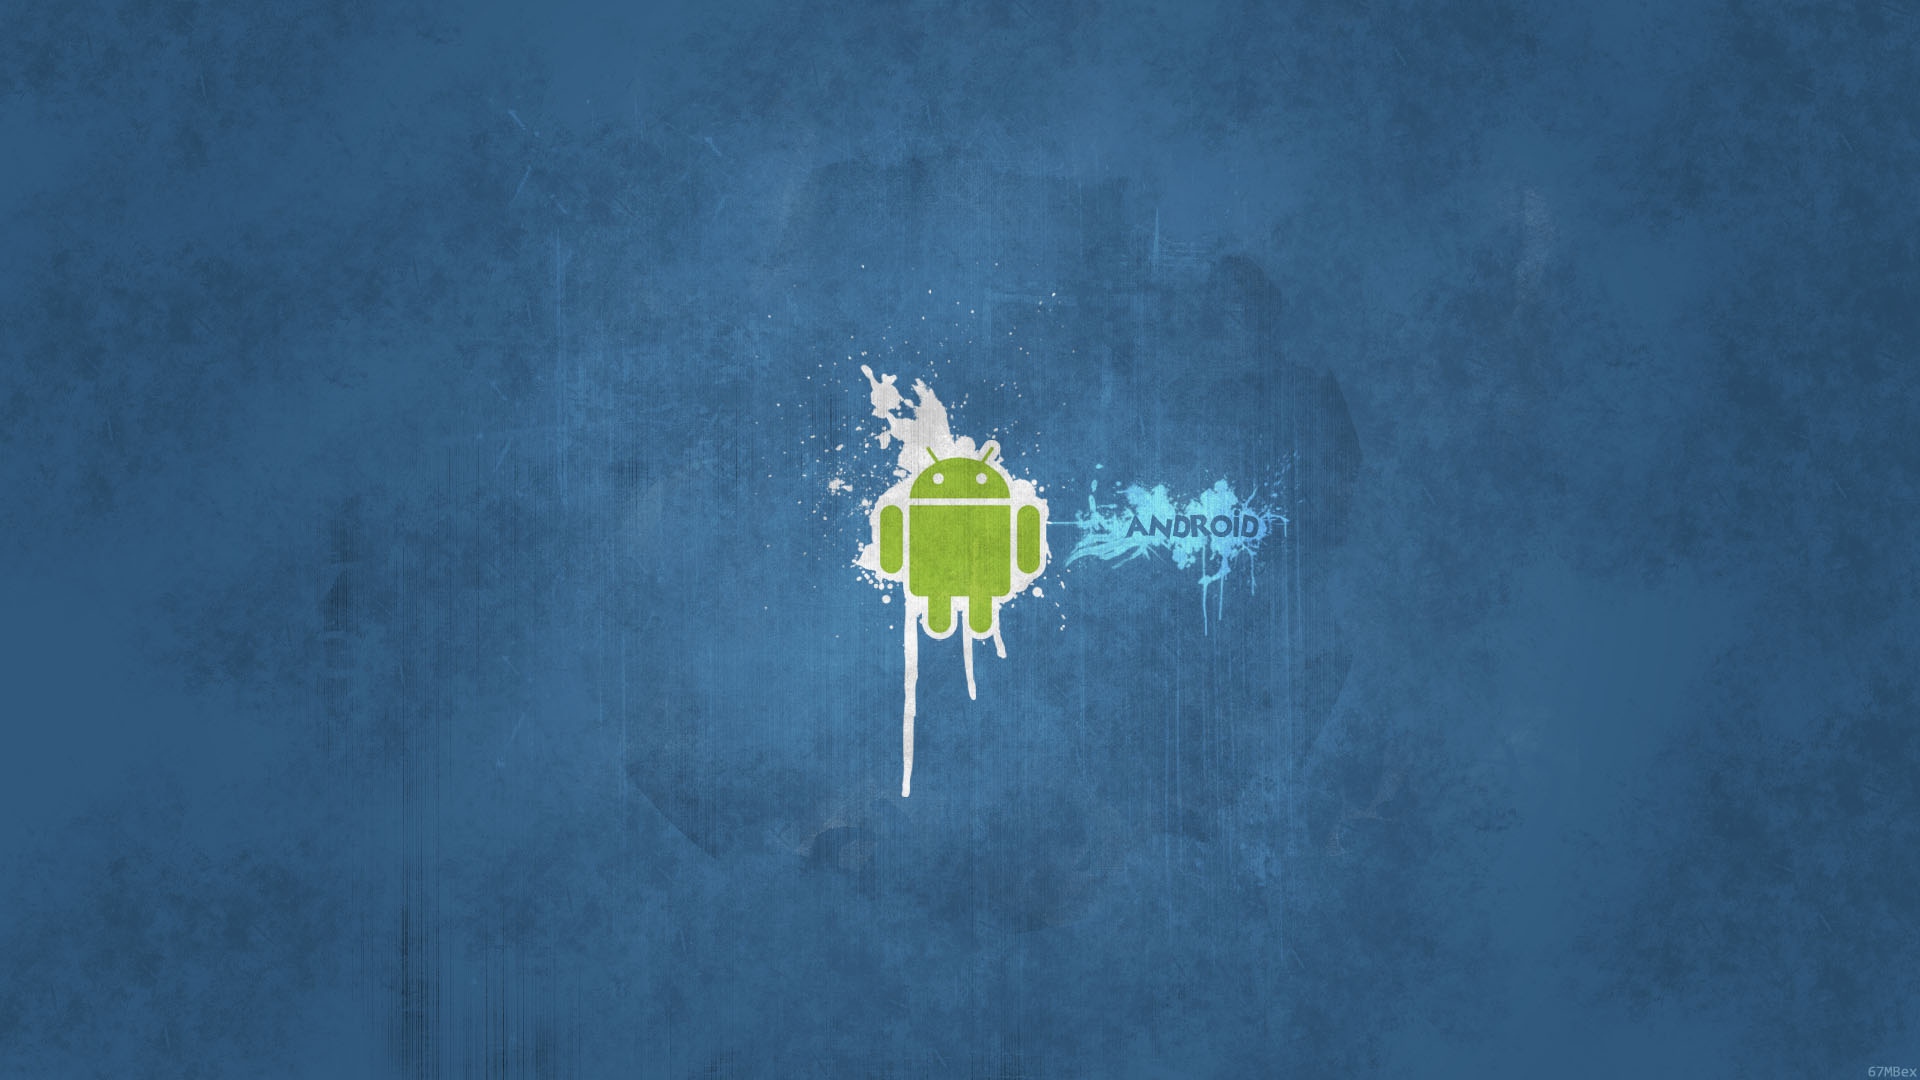 Android Art